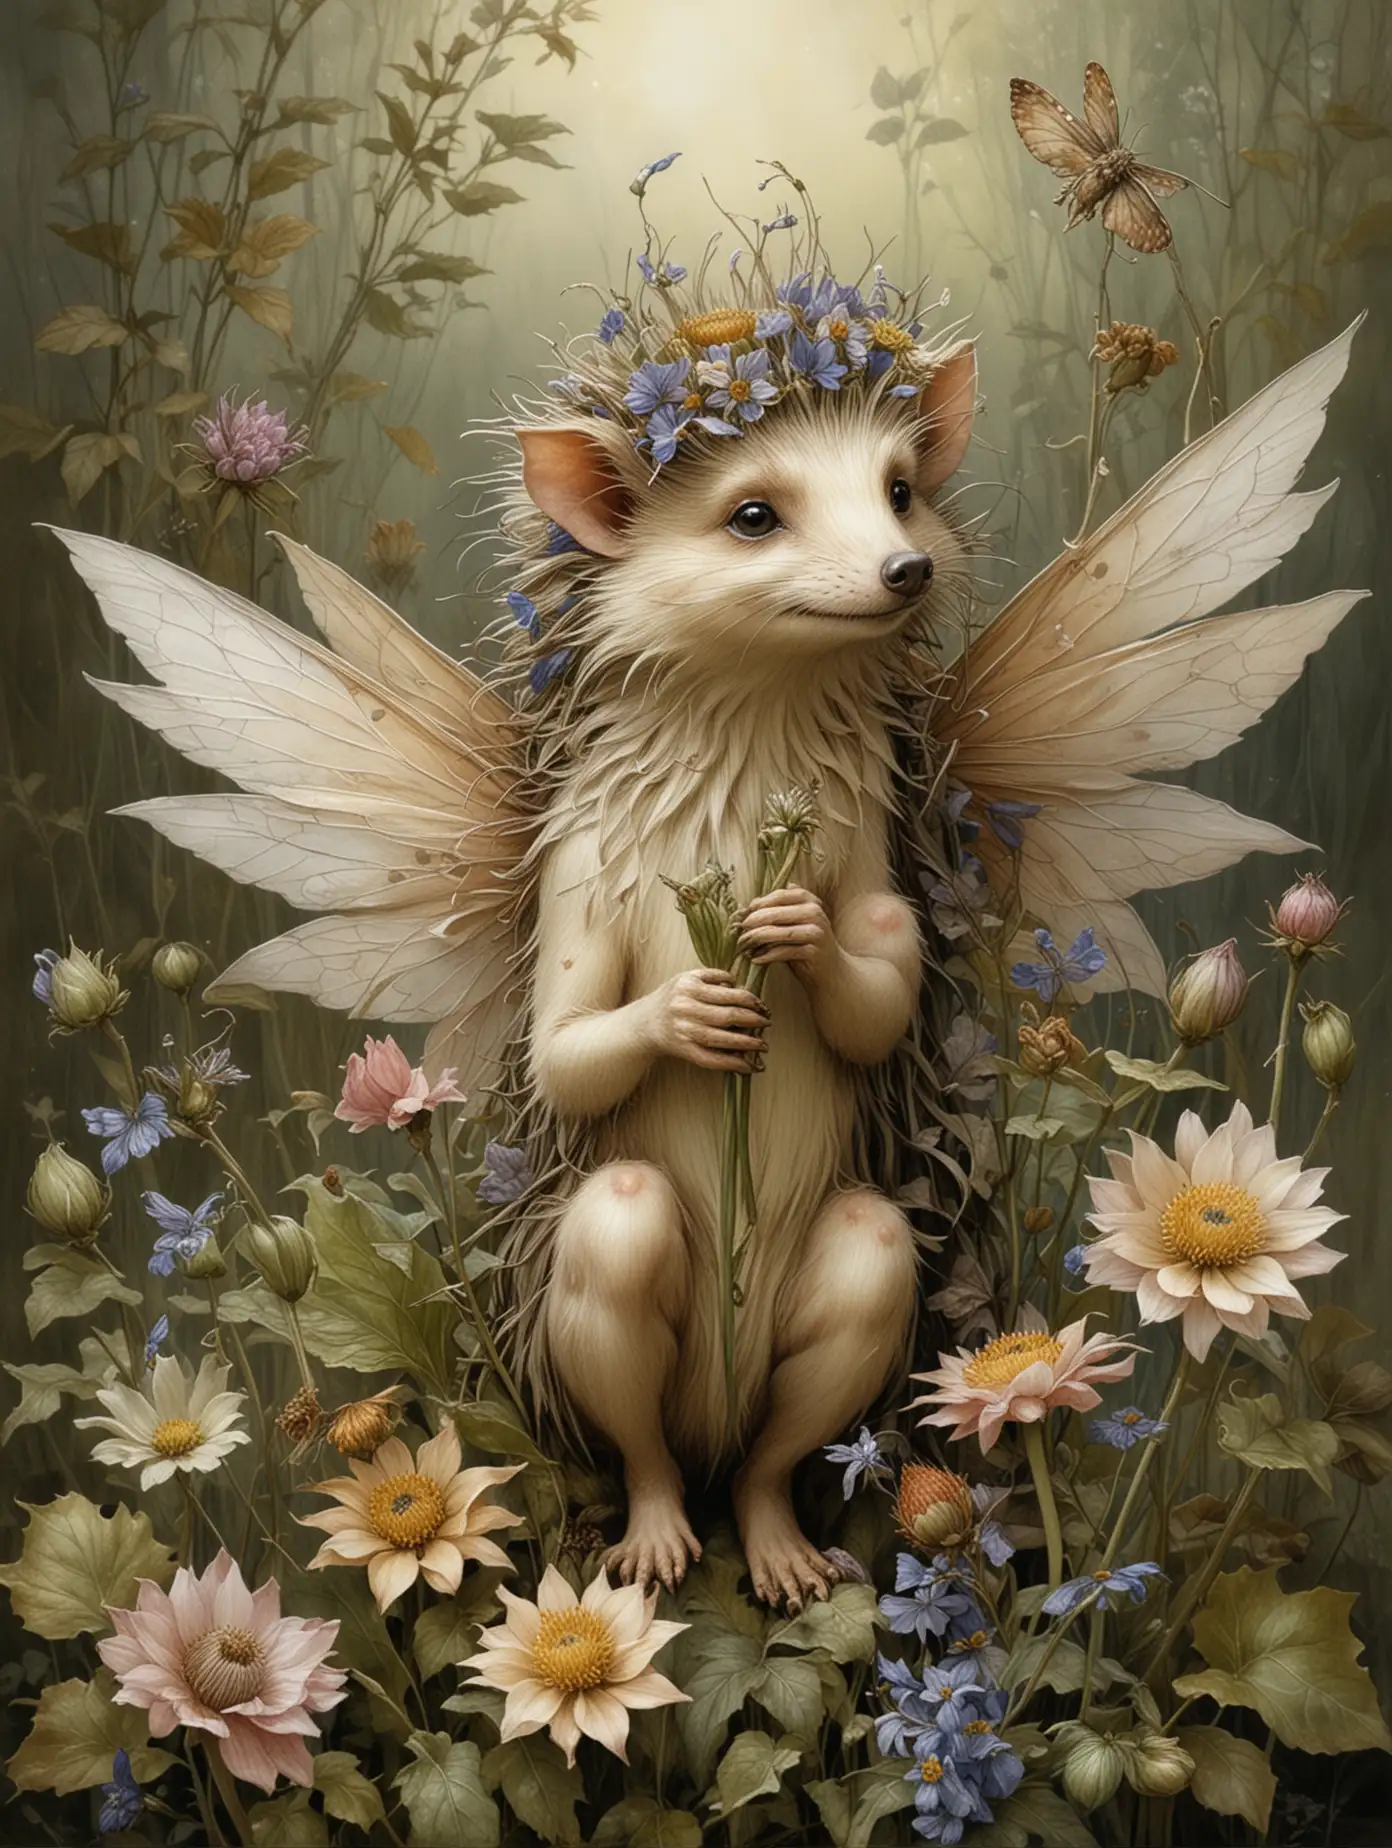 HyperRealistic Flower Fairy of Hedgehog Inspired by Cicely Mary Barker and Brian Froud